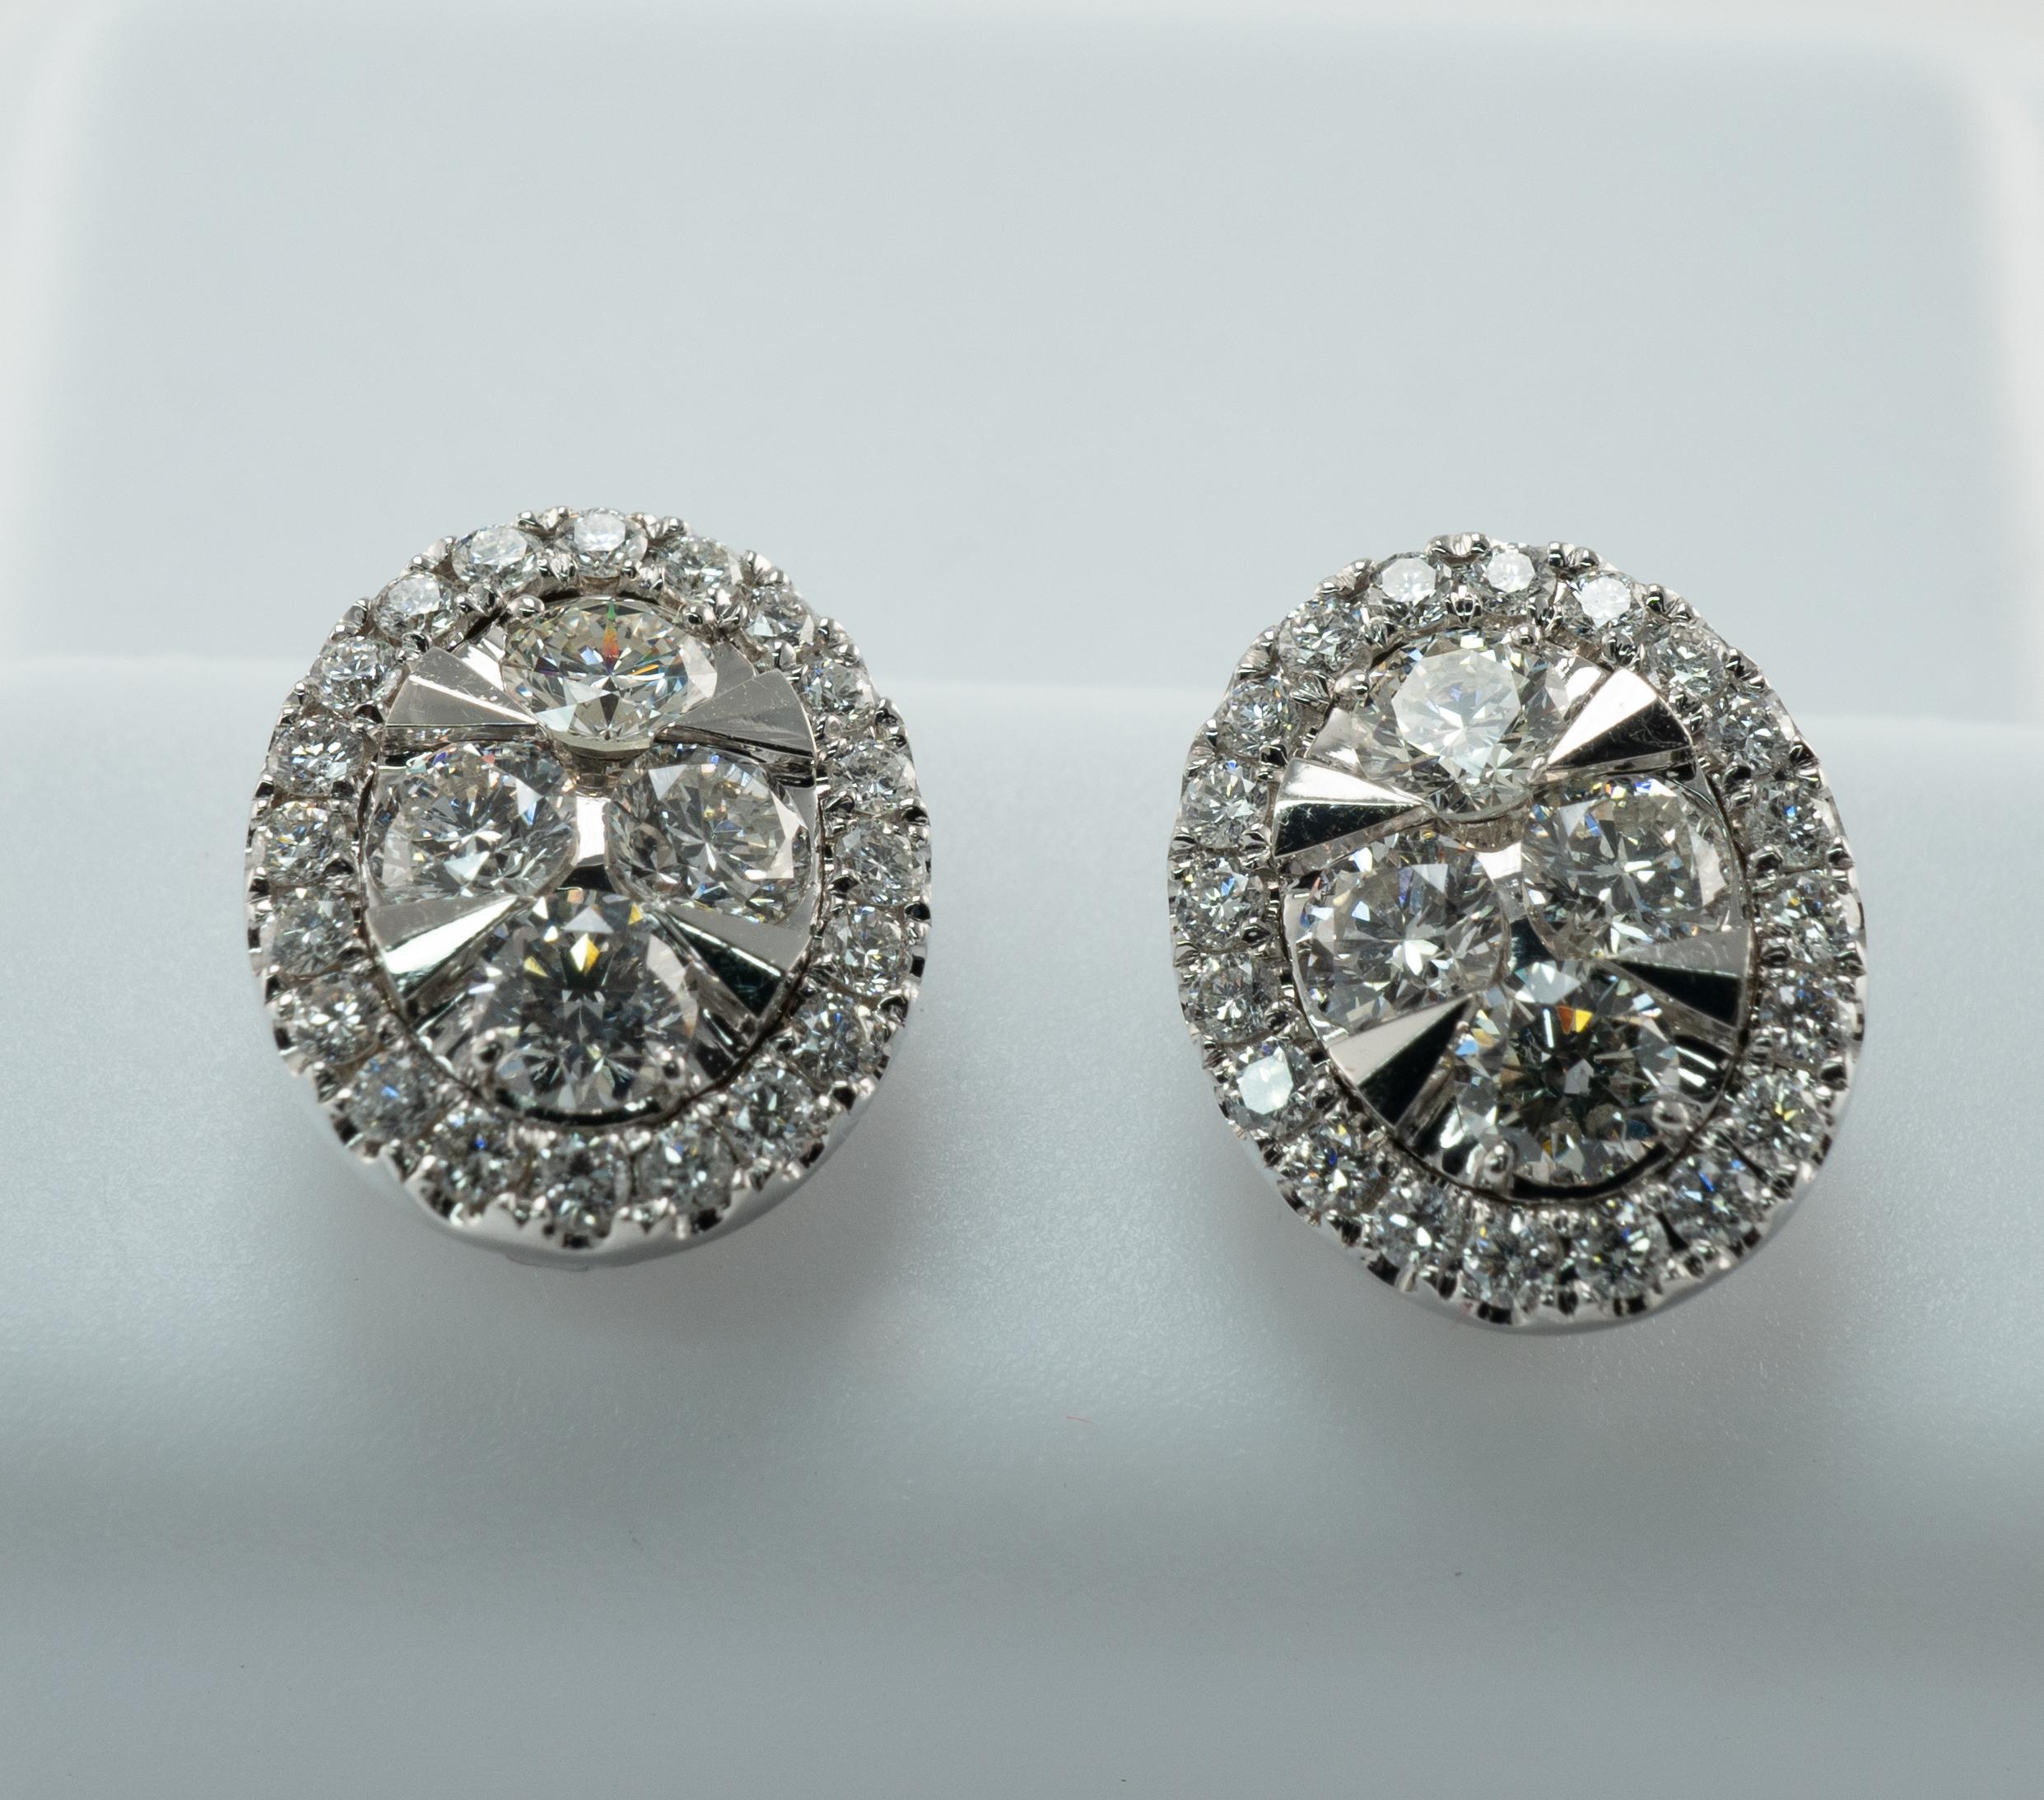 Diamond Earrings Round 14K White Gold Studs 1.04 ctw Oval shape

This pair of cluster stud diamond earrings is crafted in solid 14K White Gold. 
The center holds four round cut diamonds totaling .32 carat of VS1 clarity and H color.
The center is